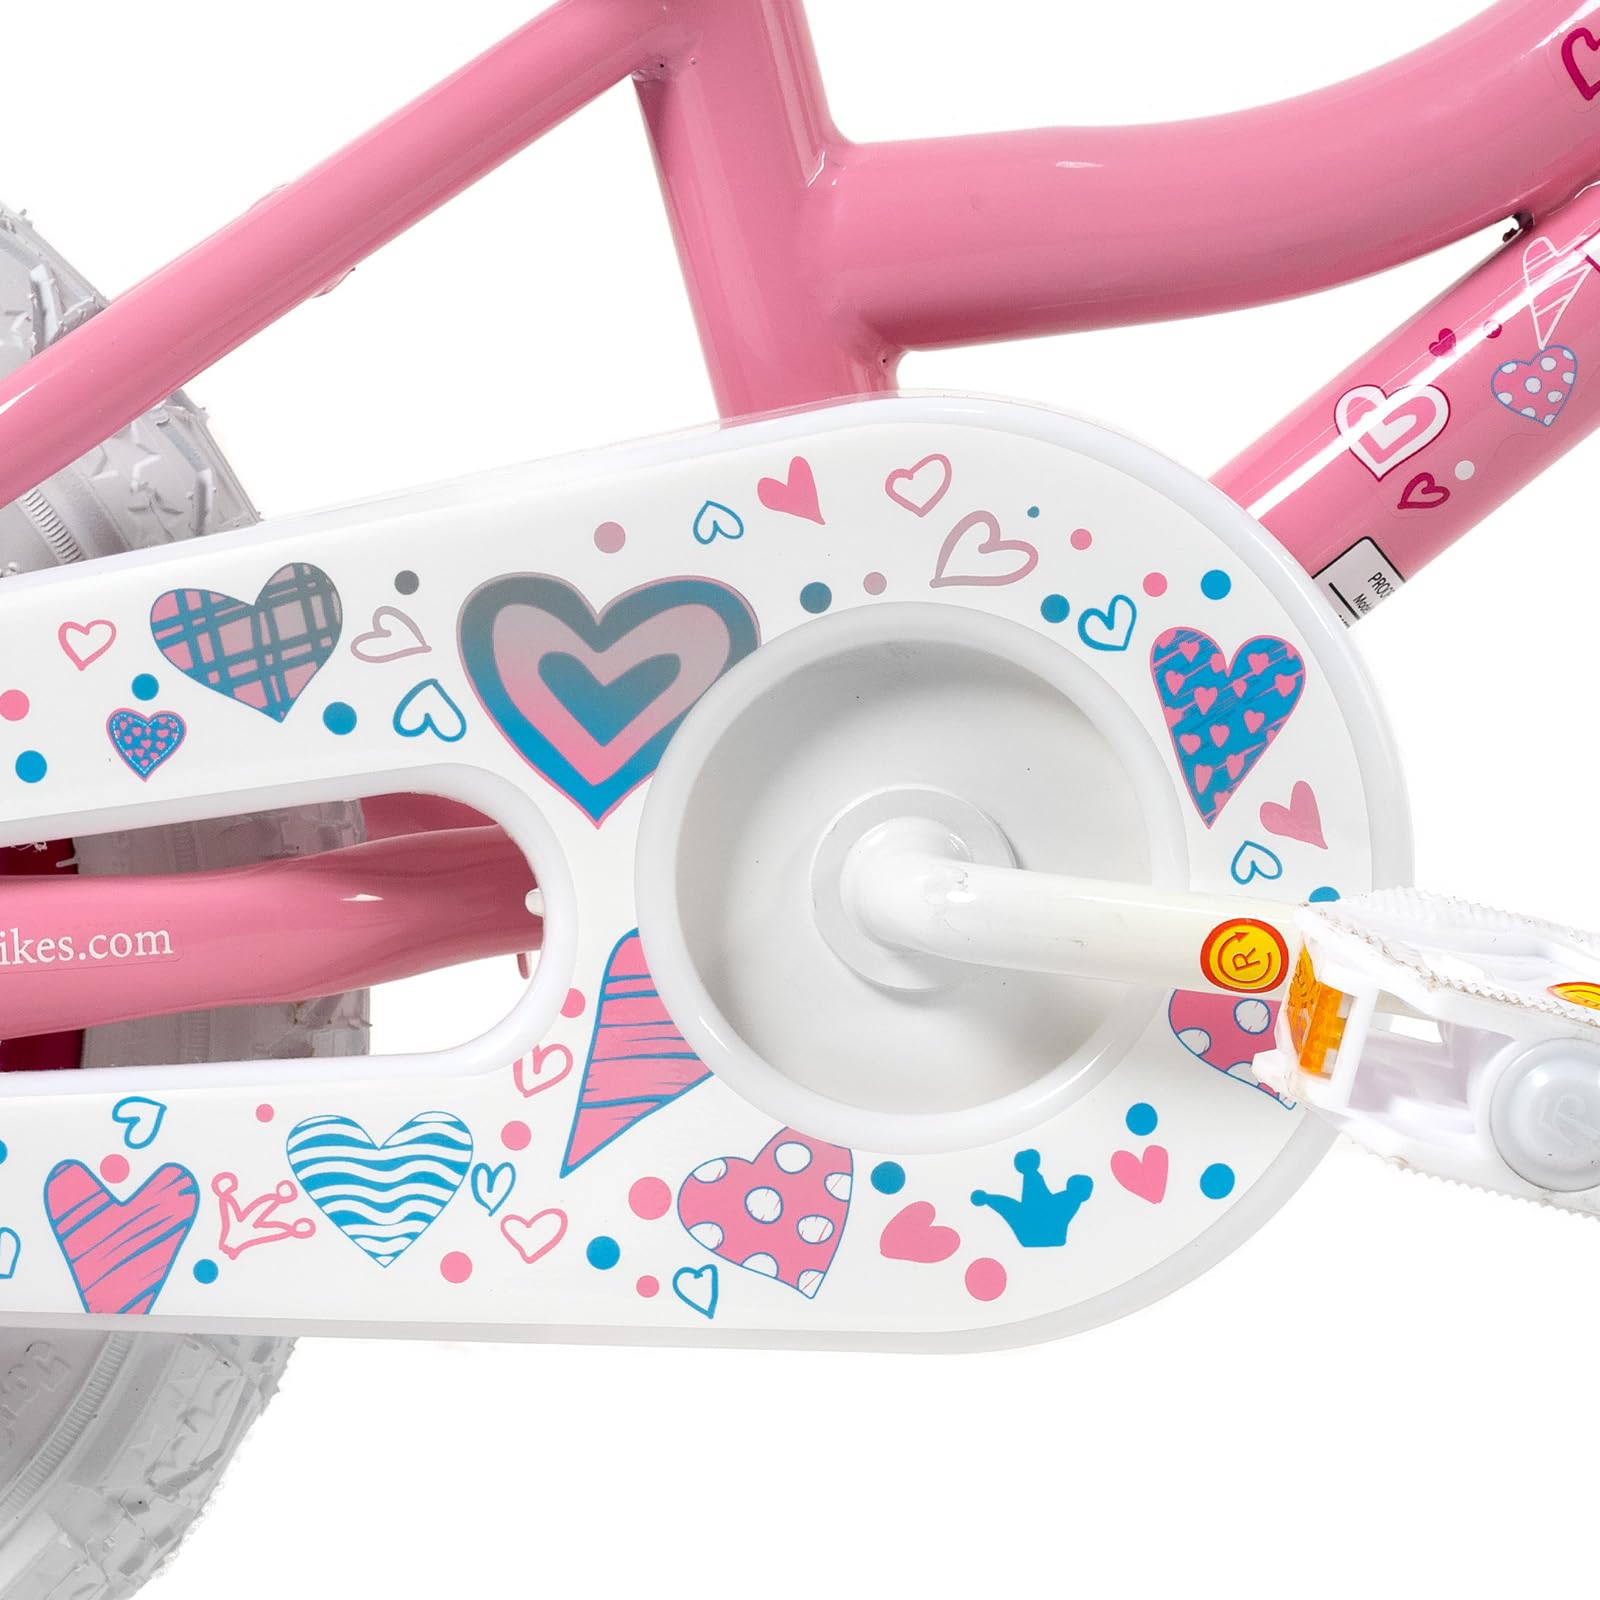 JOYSTAR 16 Inch Girls Bike Toddler Bike for 4 5 6 7 Years Old Girl 16" Kids Bikes for Ages 4-7 yr with Training Wheels and Baske